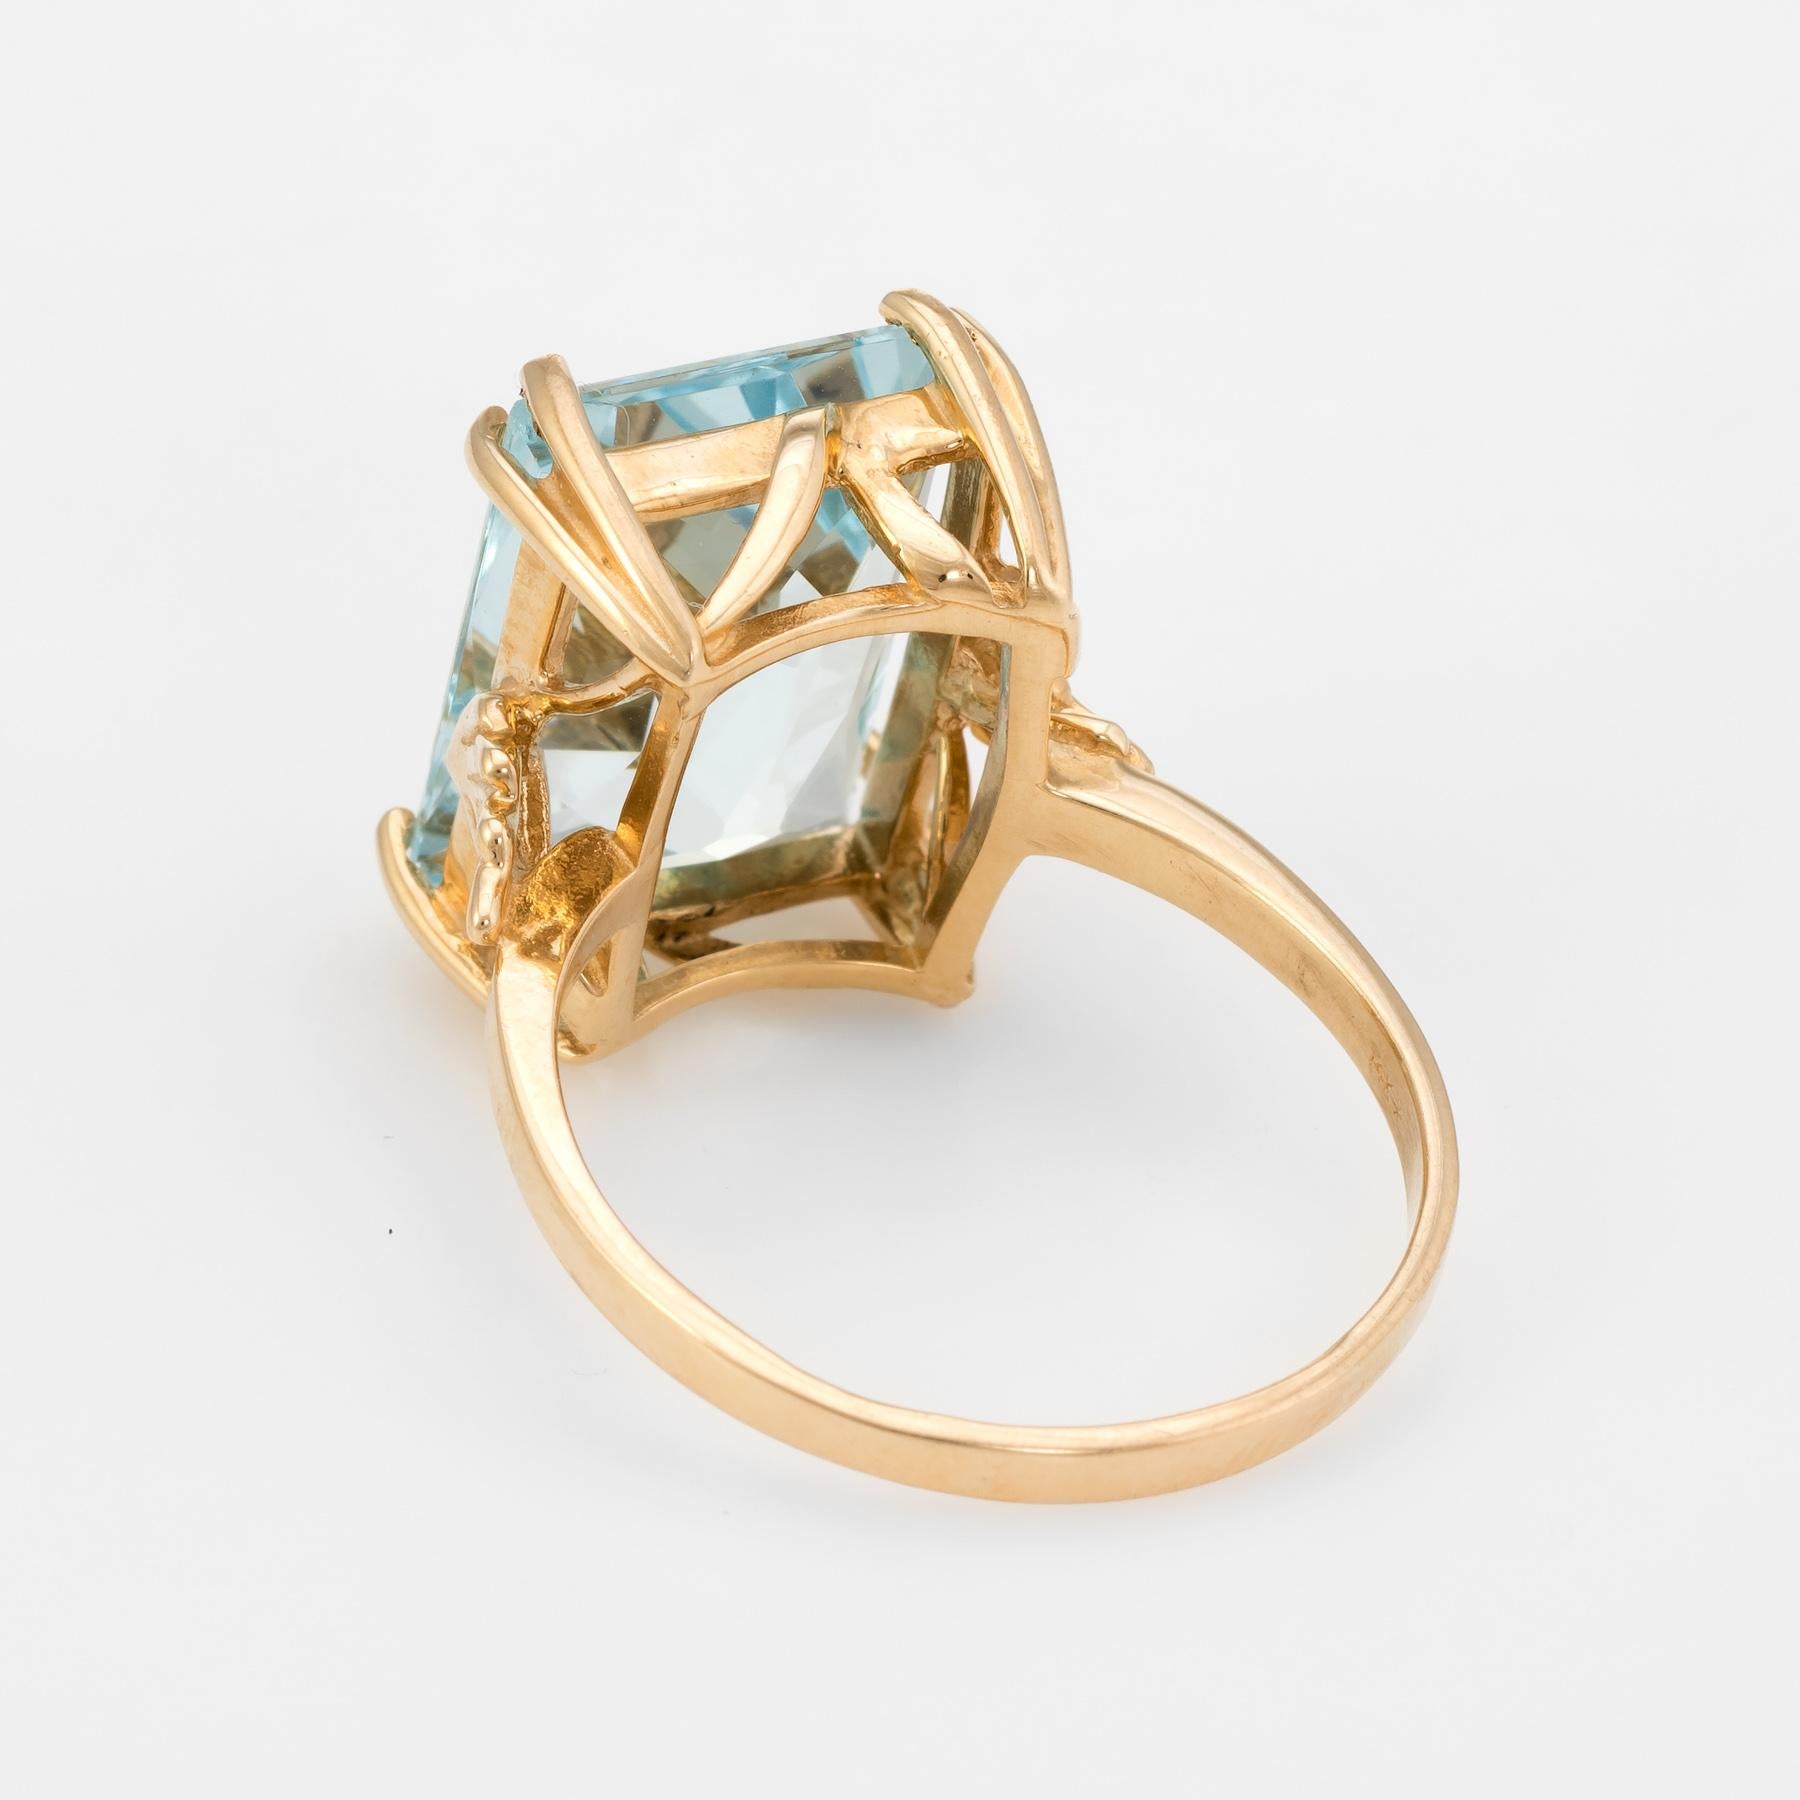 13ct Aquamarine Cocktail Ring Vintage 14k Yellow Gold Estate Fine Jewelry 10.75 In Excellent Condition In Torrance, CA